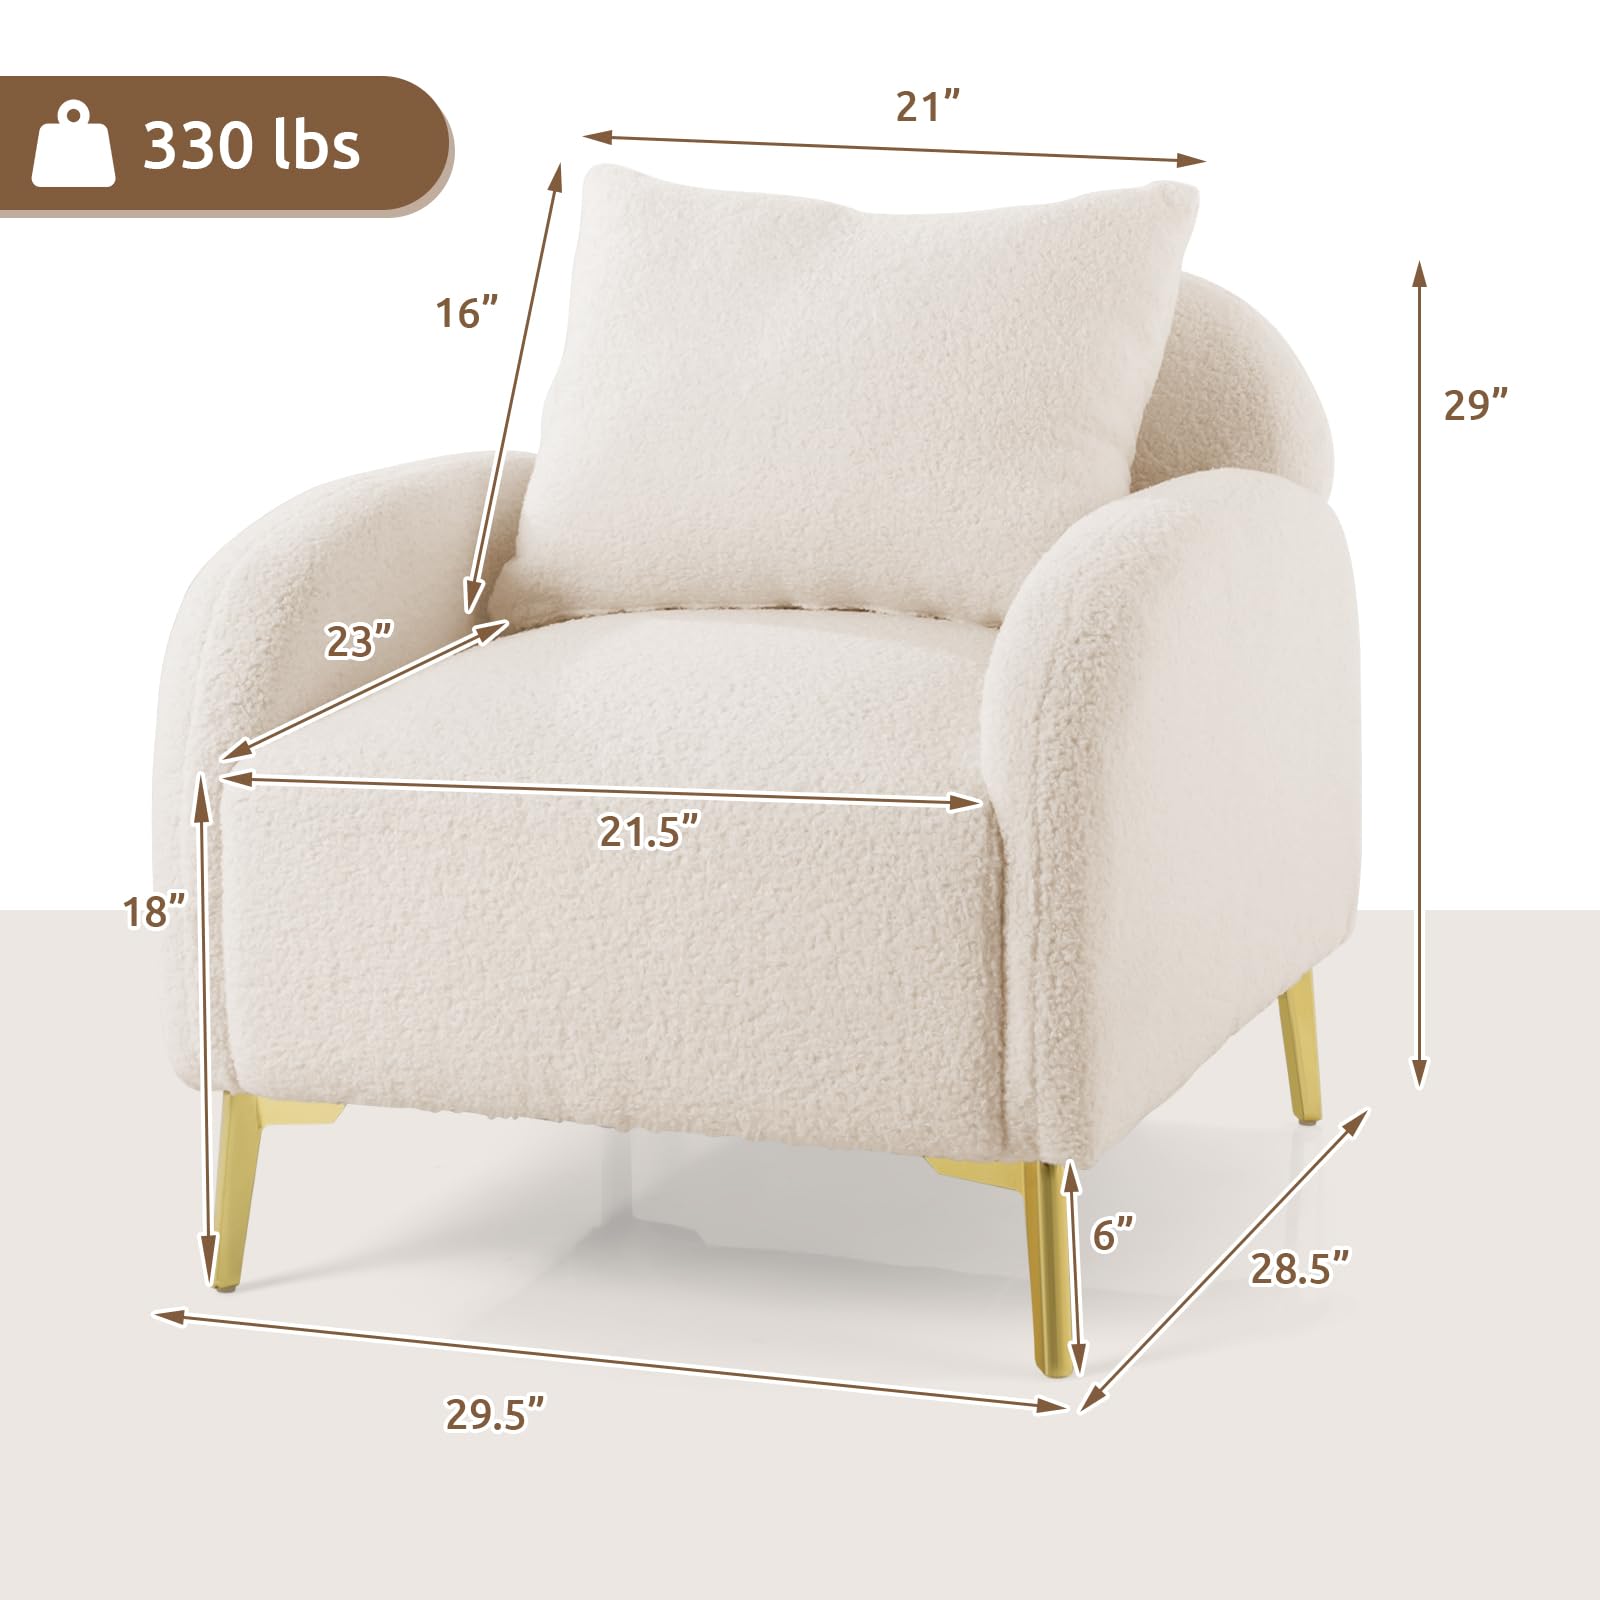 Giantex Accent Chair, Upholstered Armchair with Removable Pillow, Soft Padded Seat & Stable Metal Legs